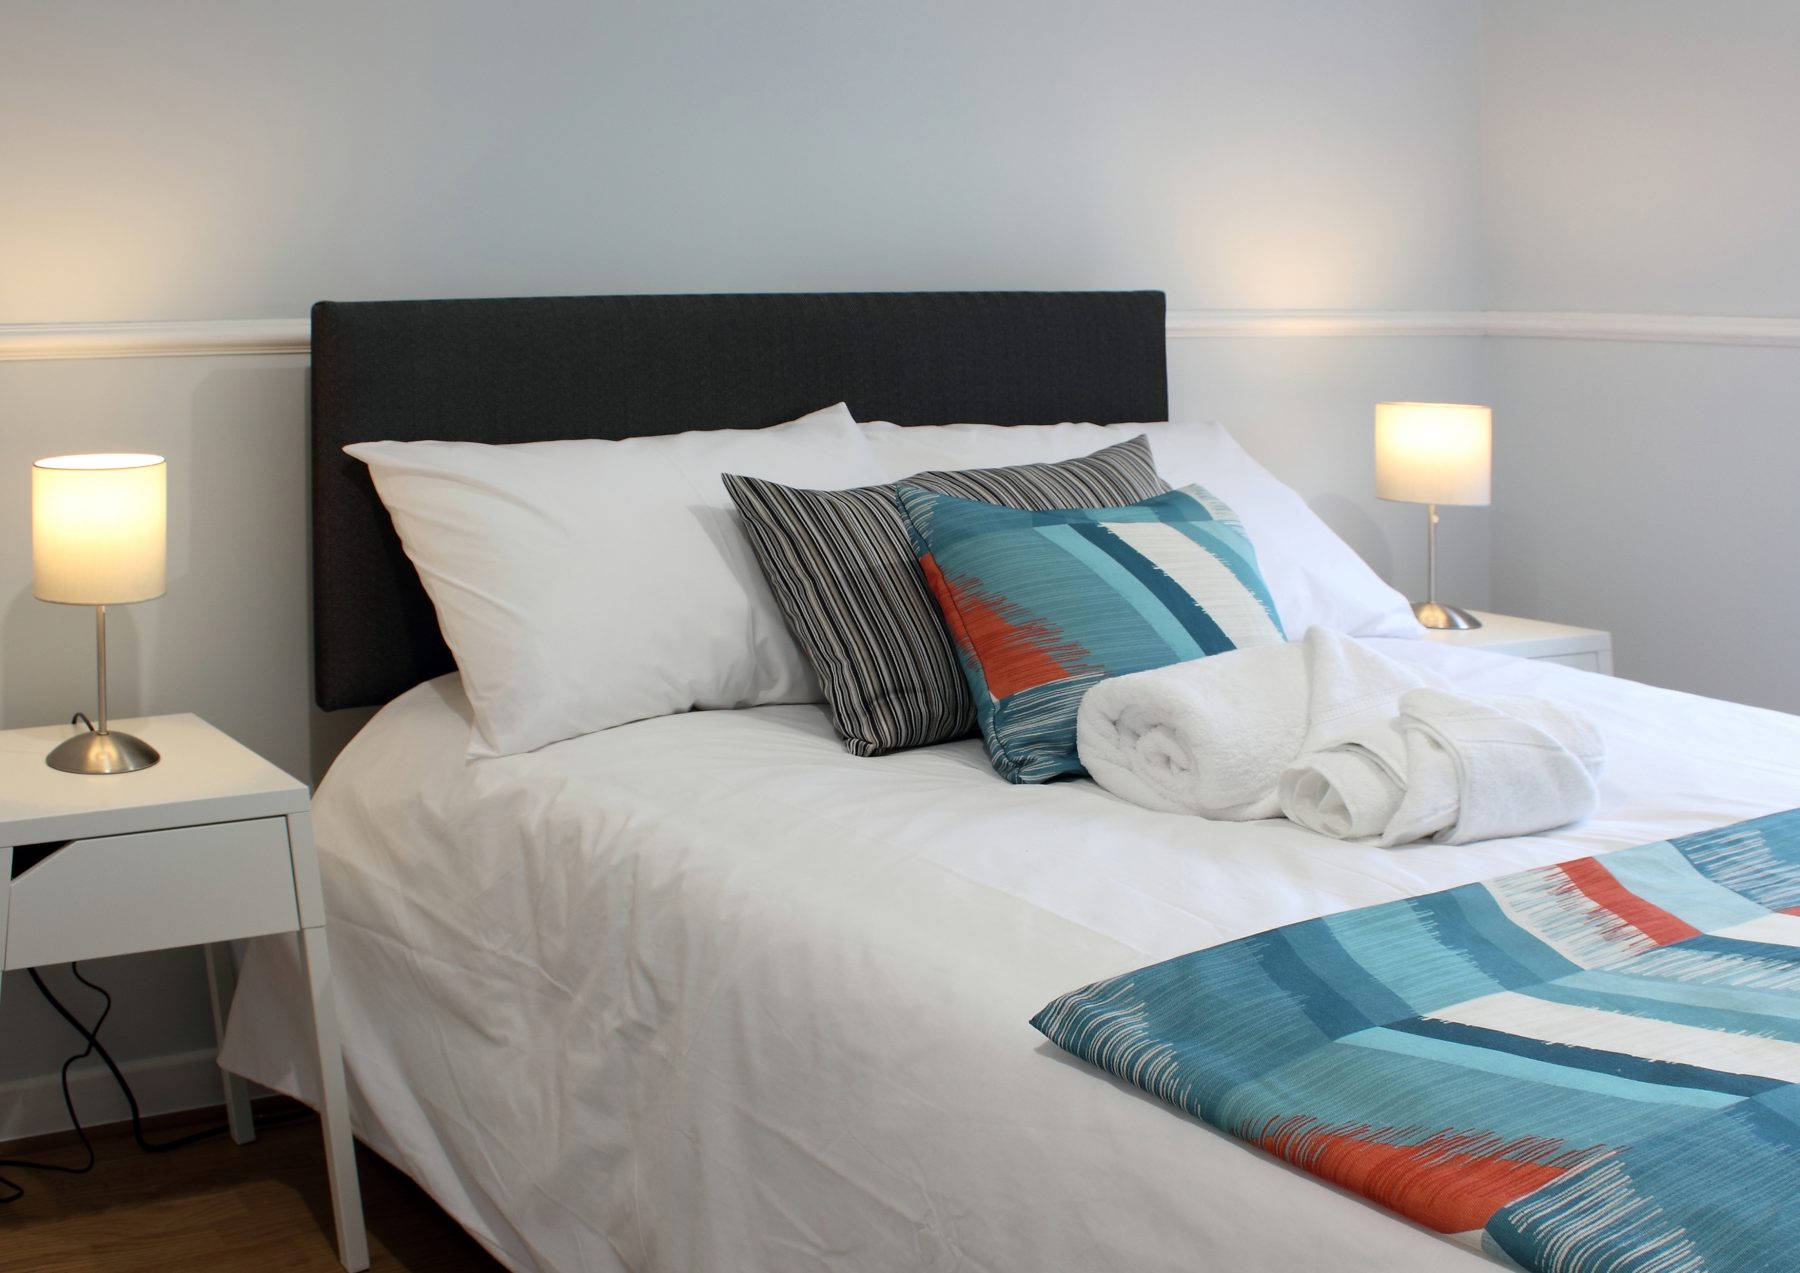 McQuaid Apartment Suite - Self-Catering Accommodations in Dungannon, Northern Ireland